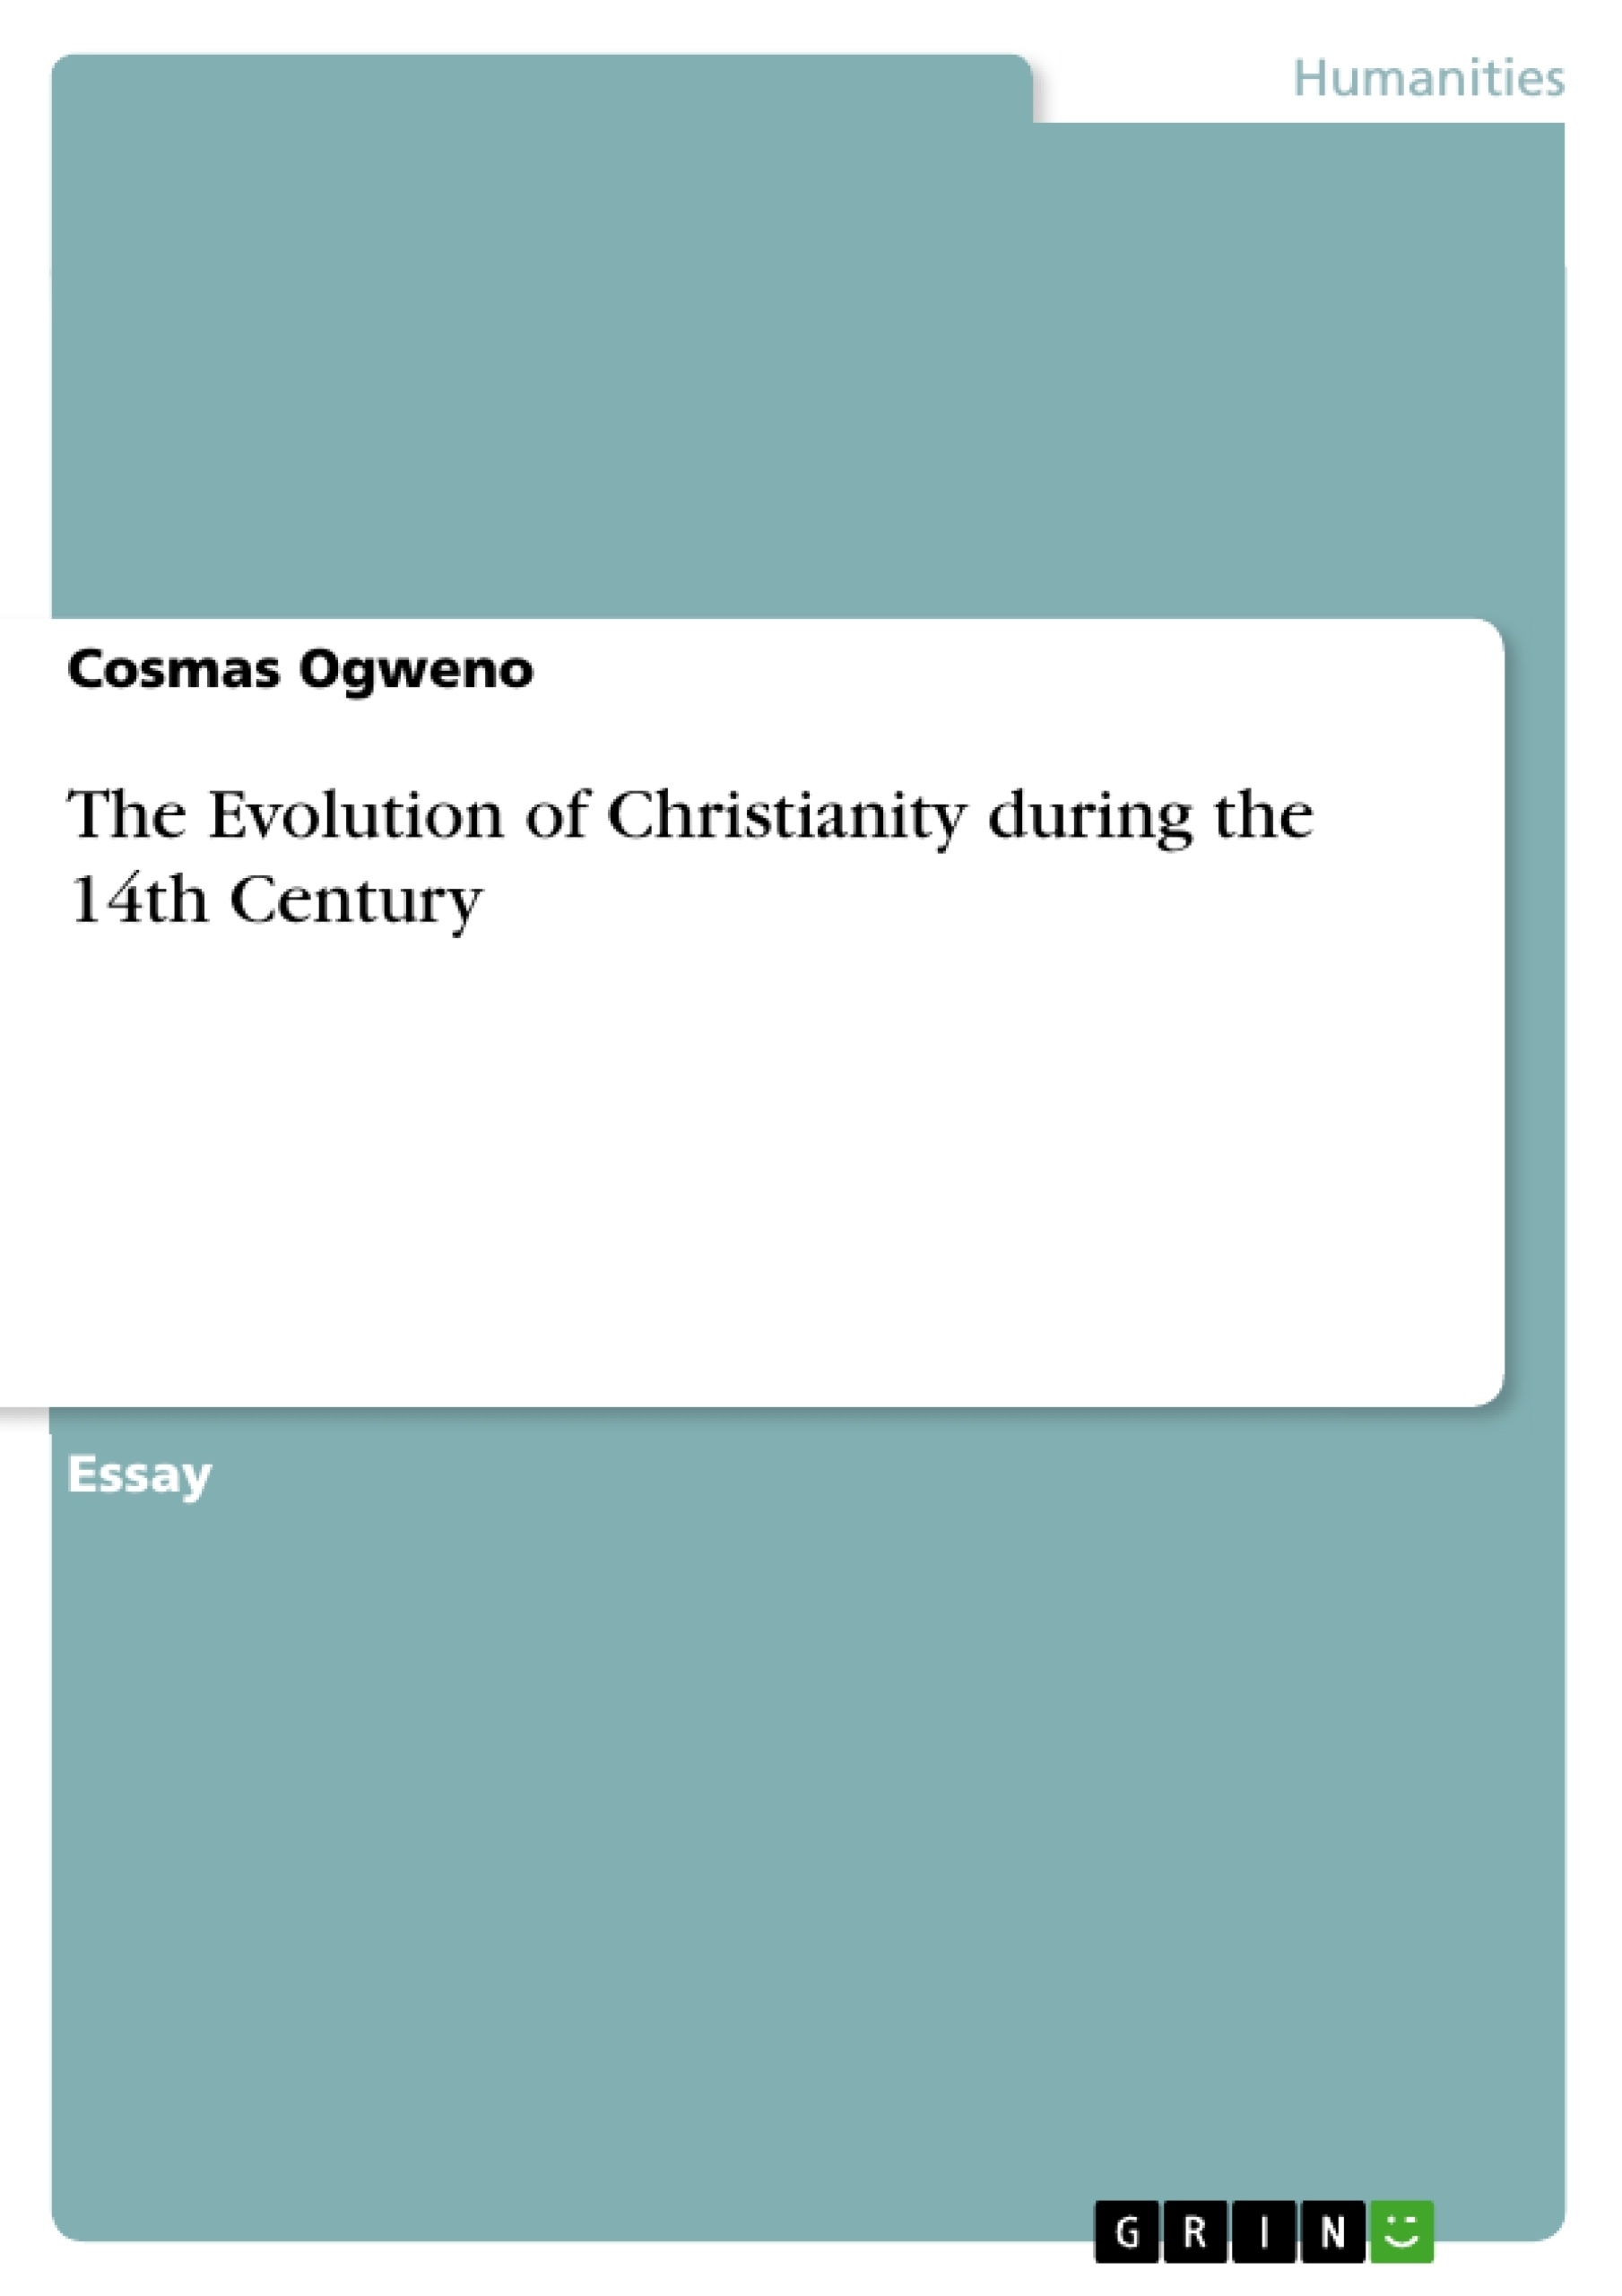 Title: The Evolution of Christianity during the 14th Century